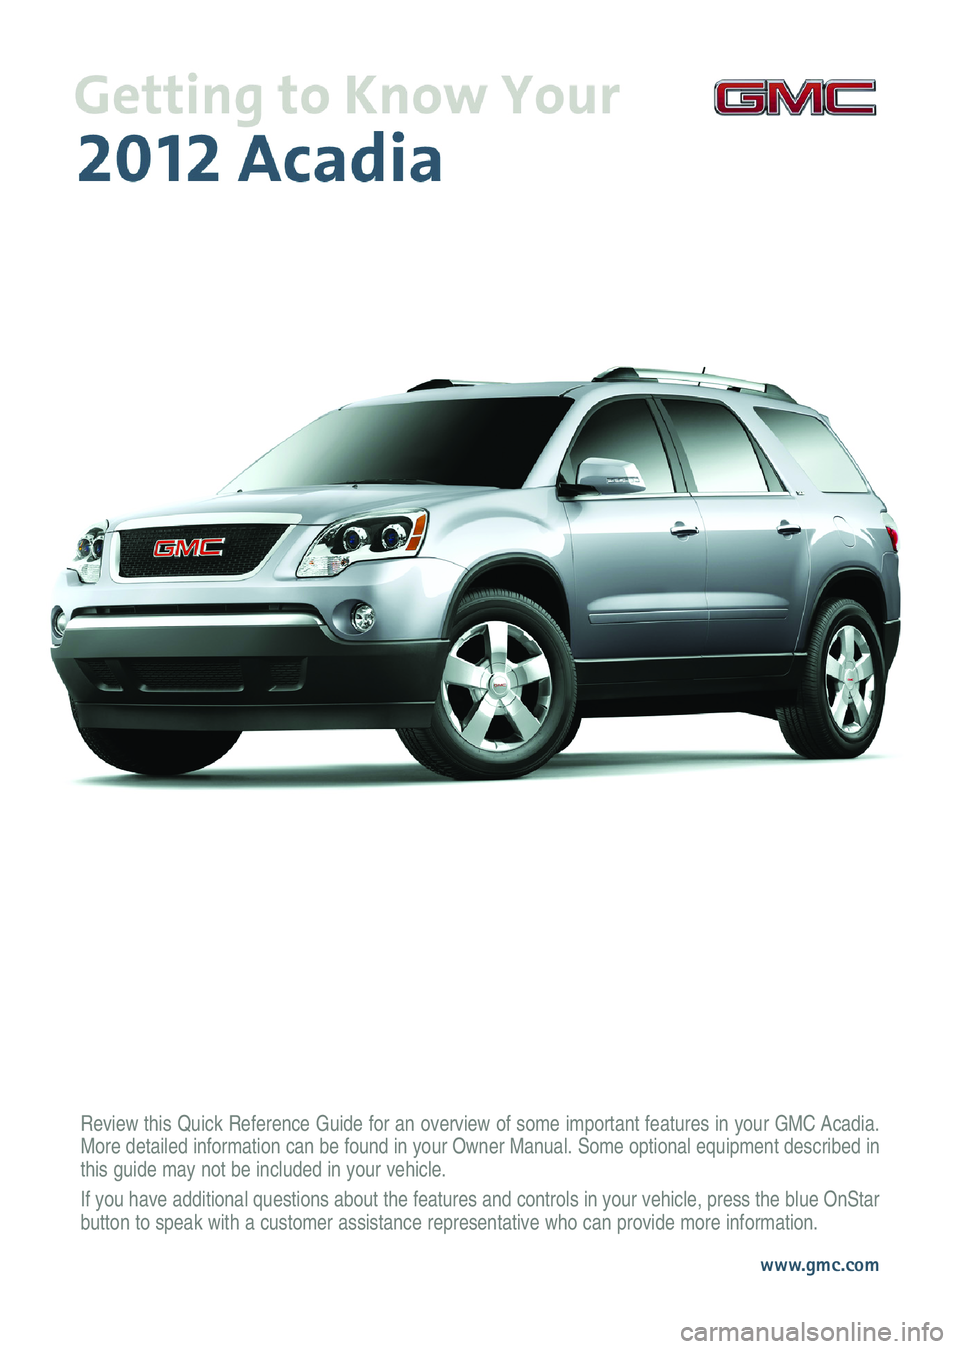 GMC ACADIA 2012  Get To Know Guide Review this Quick Reference Guide for an overview of some important features in your GMC Acadia.
More detailed information can be found in your Owner Manual. Some optional equipment described in
this 